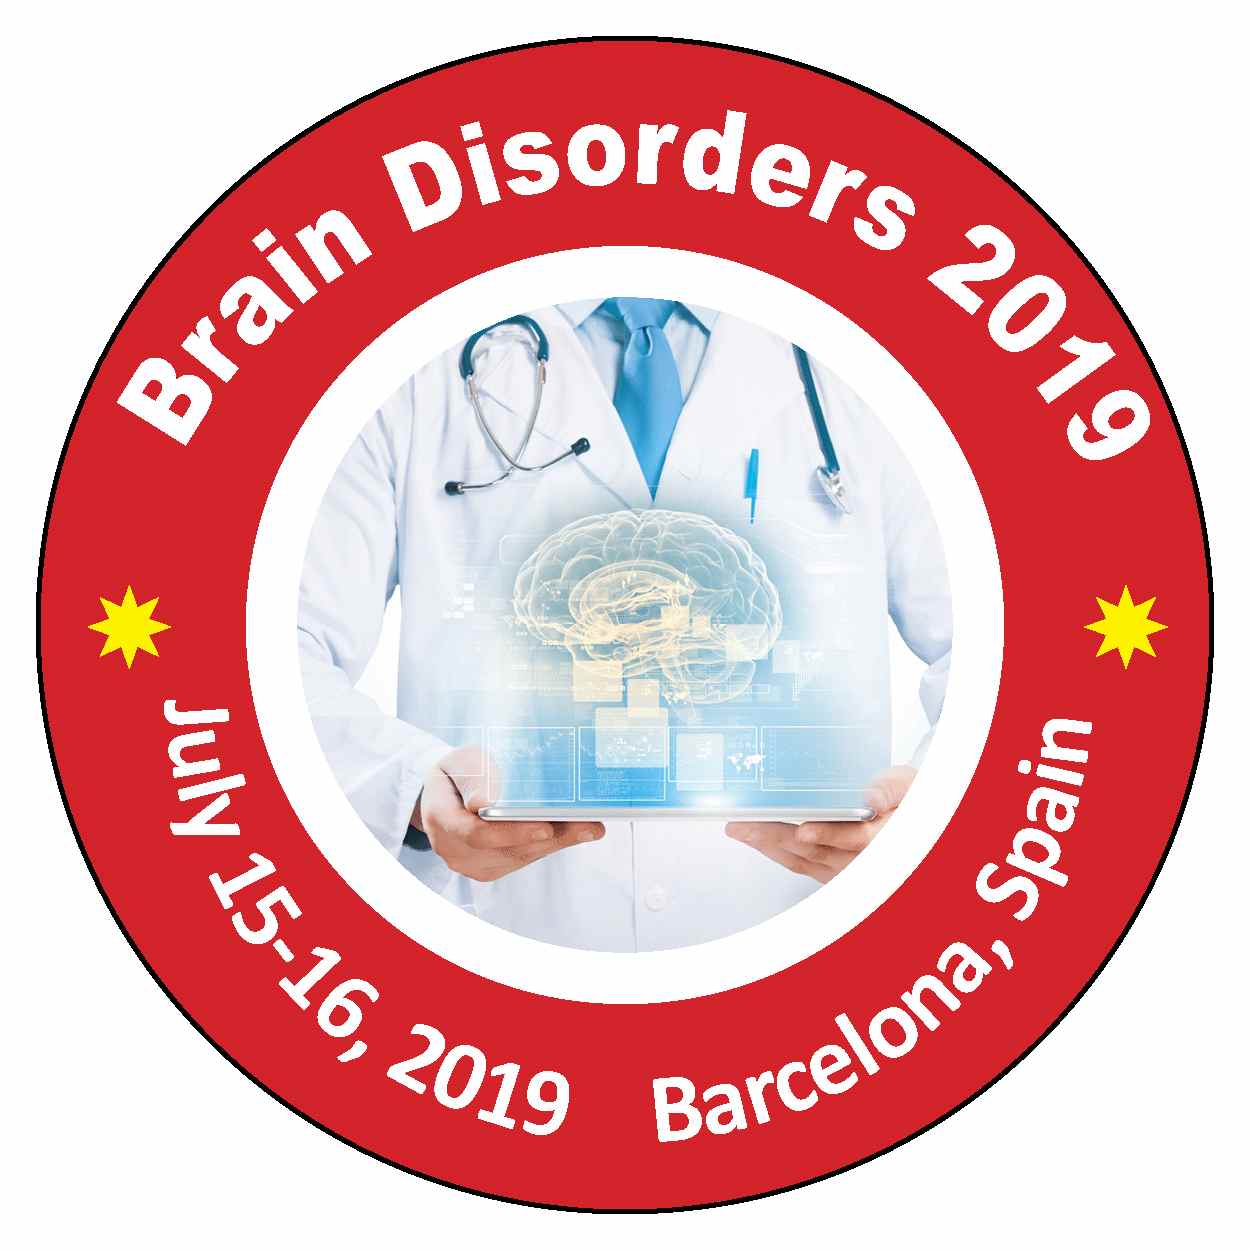 4th Annual Conference on Brain Disorders, Neurology and Therapeutics